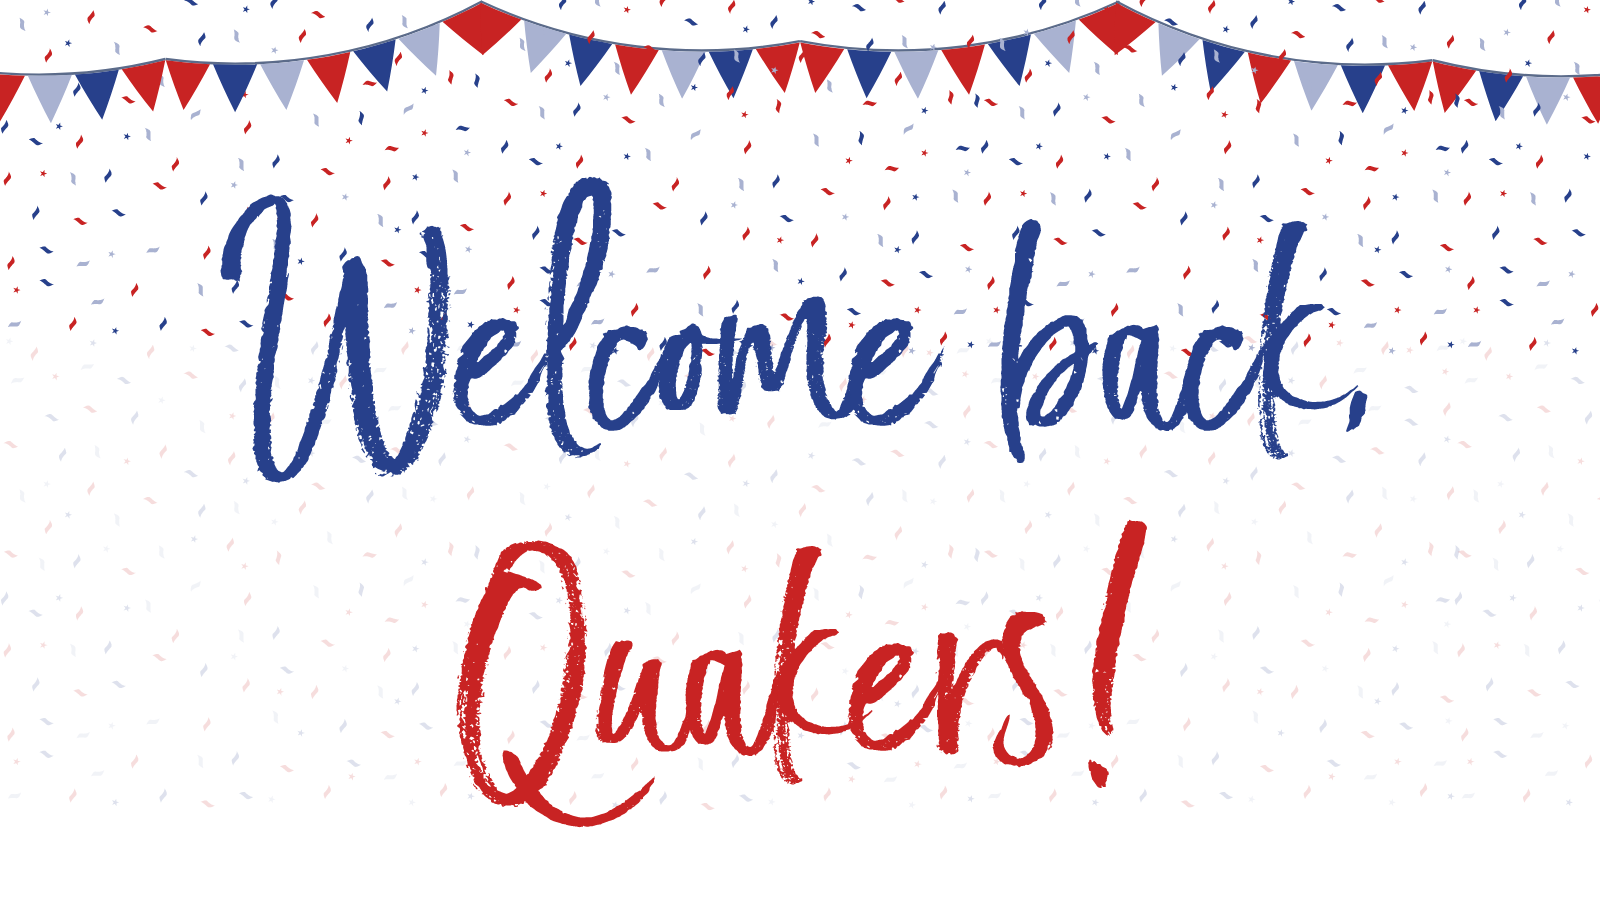 Welcome back Quakers